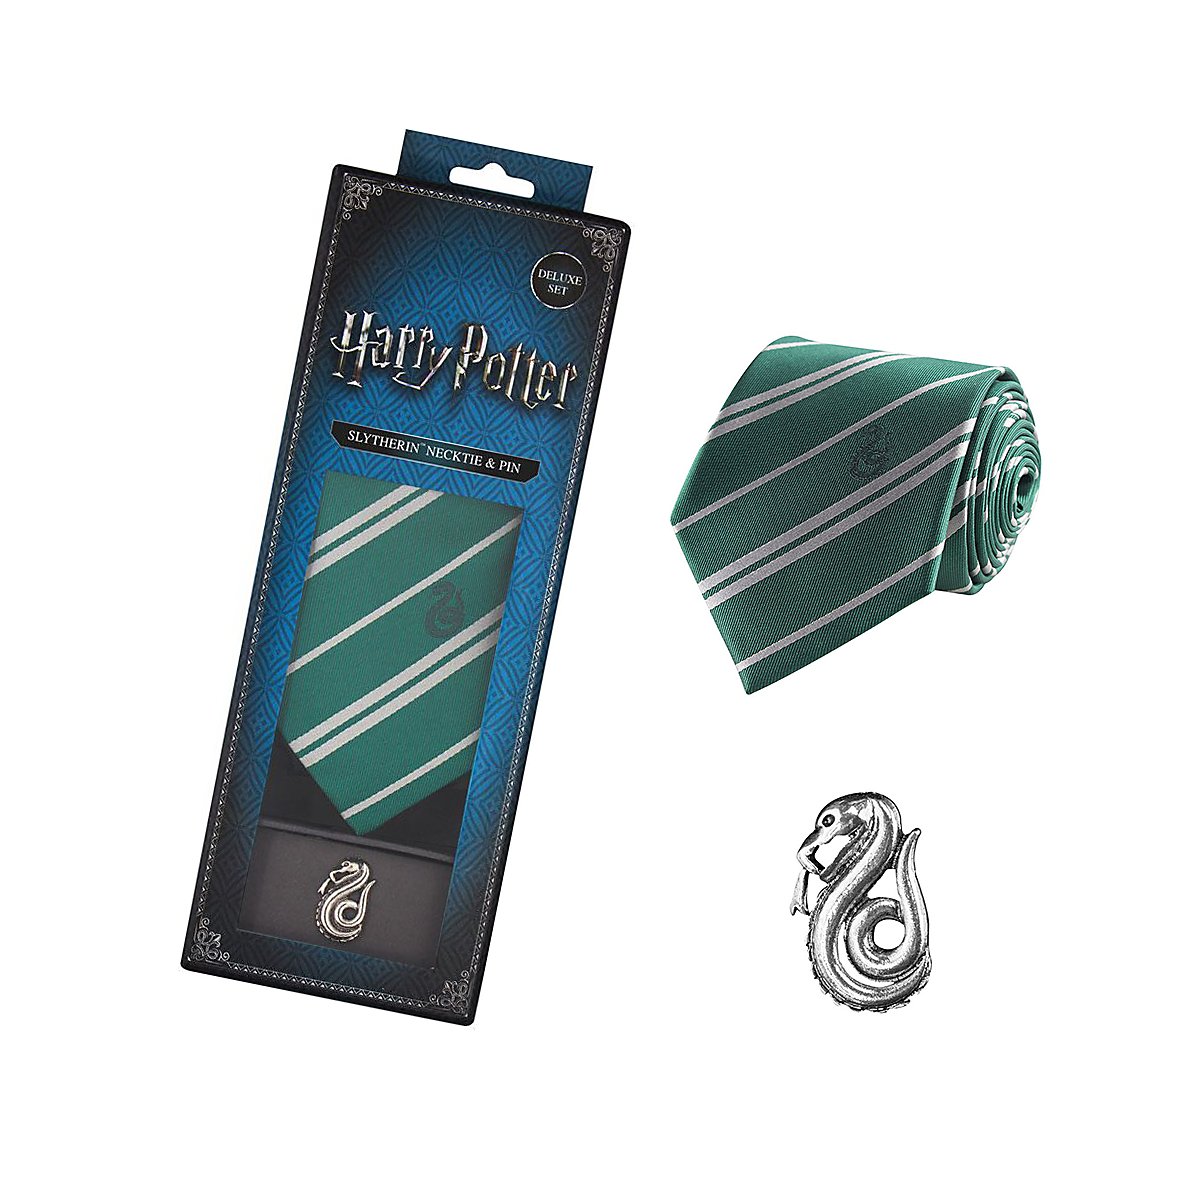 https://i.mmo.cm/is/image/mmoimg/se-product-zoom/harry-potter-tie-pin-deluxe-box-slytherin--se-530977-1.jpg